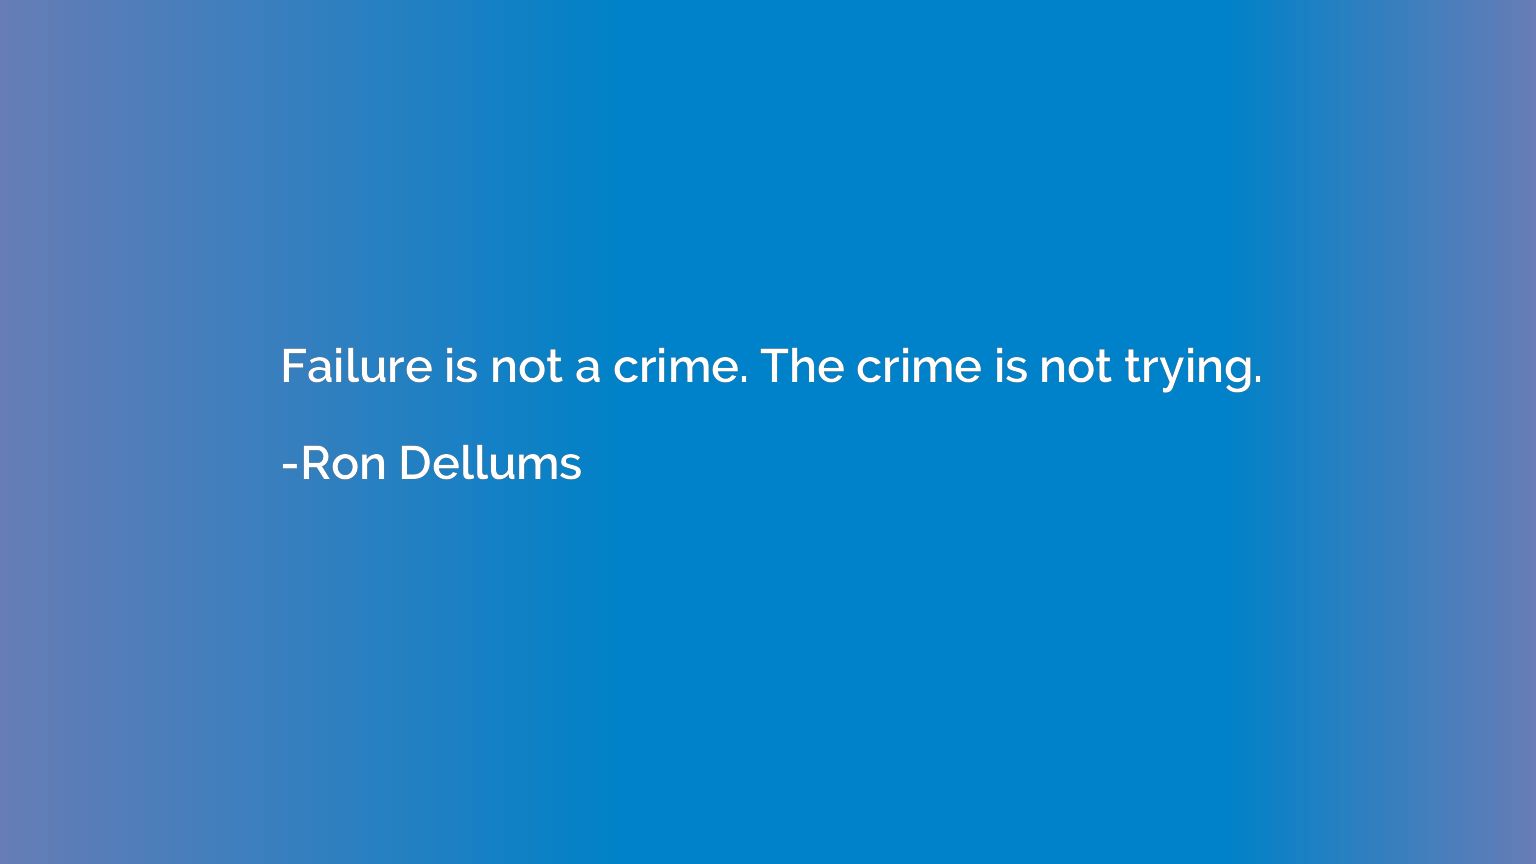 Failure is not a crime. The crime is not trying.